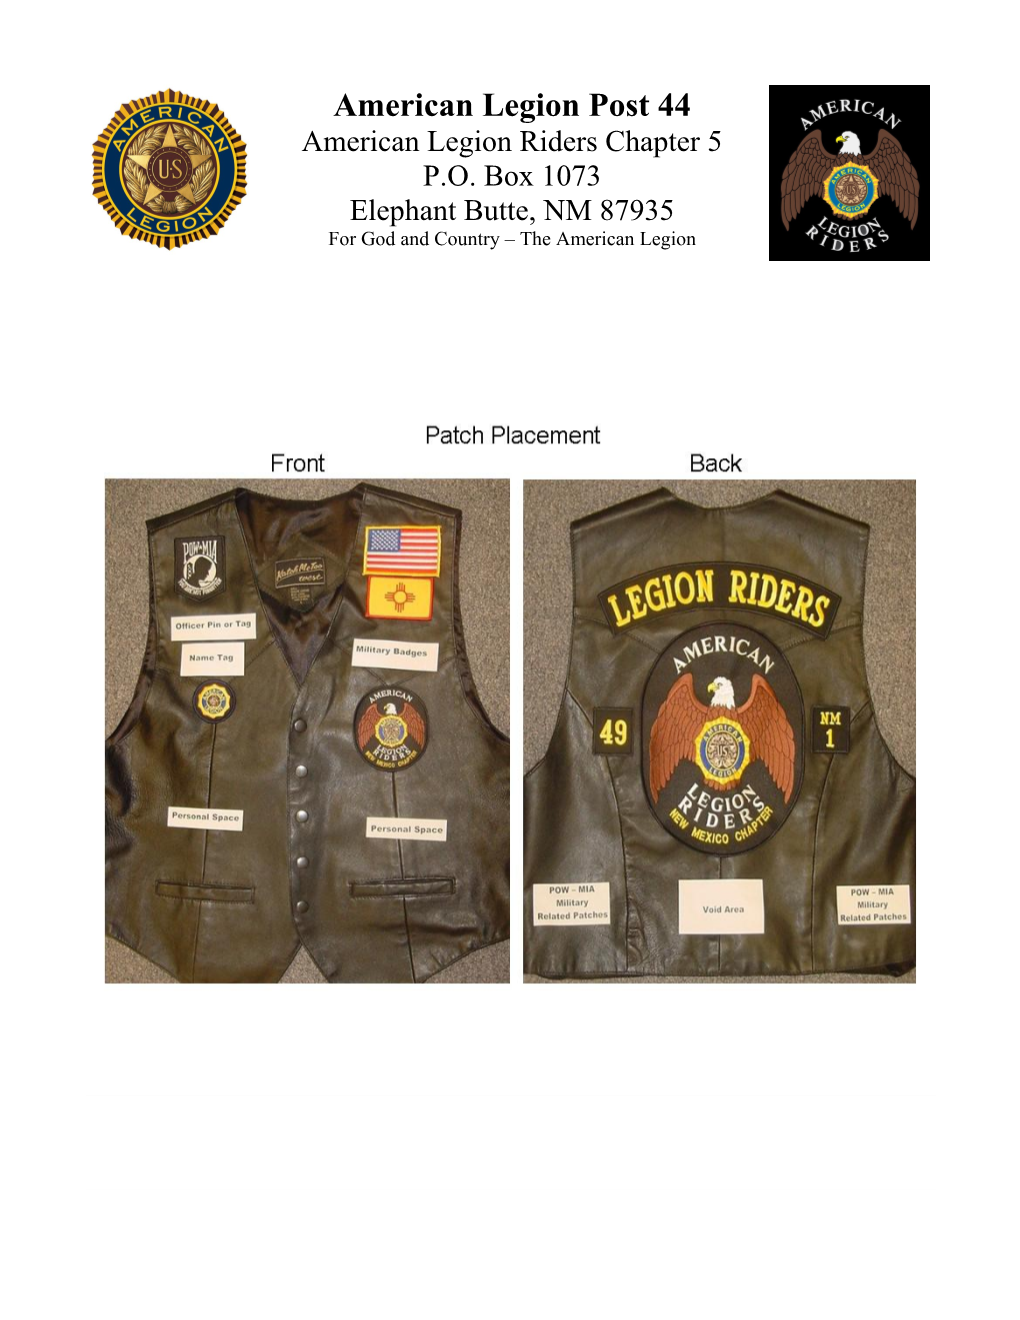 Wearing of Patches